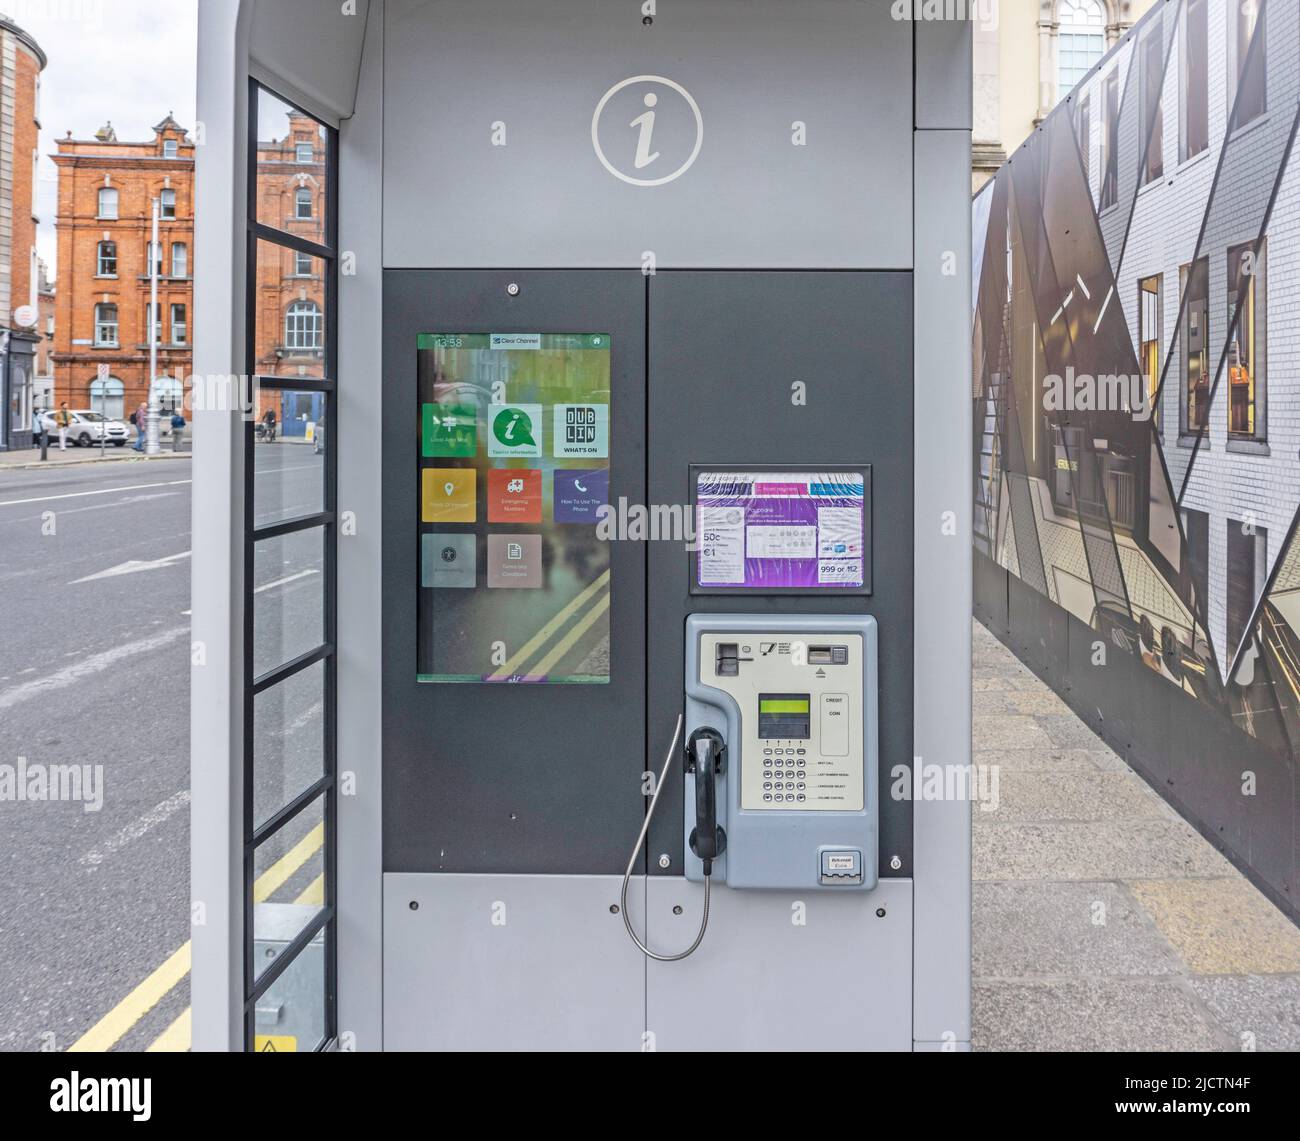 New digital phone boxes/kiosks from Eir are being installed in Dublin City. Known as Digital Pedestal with touch screens and information. Stock Photo